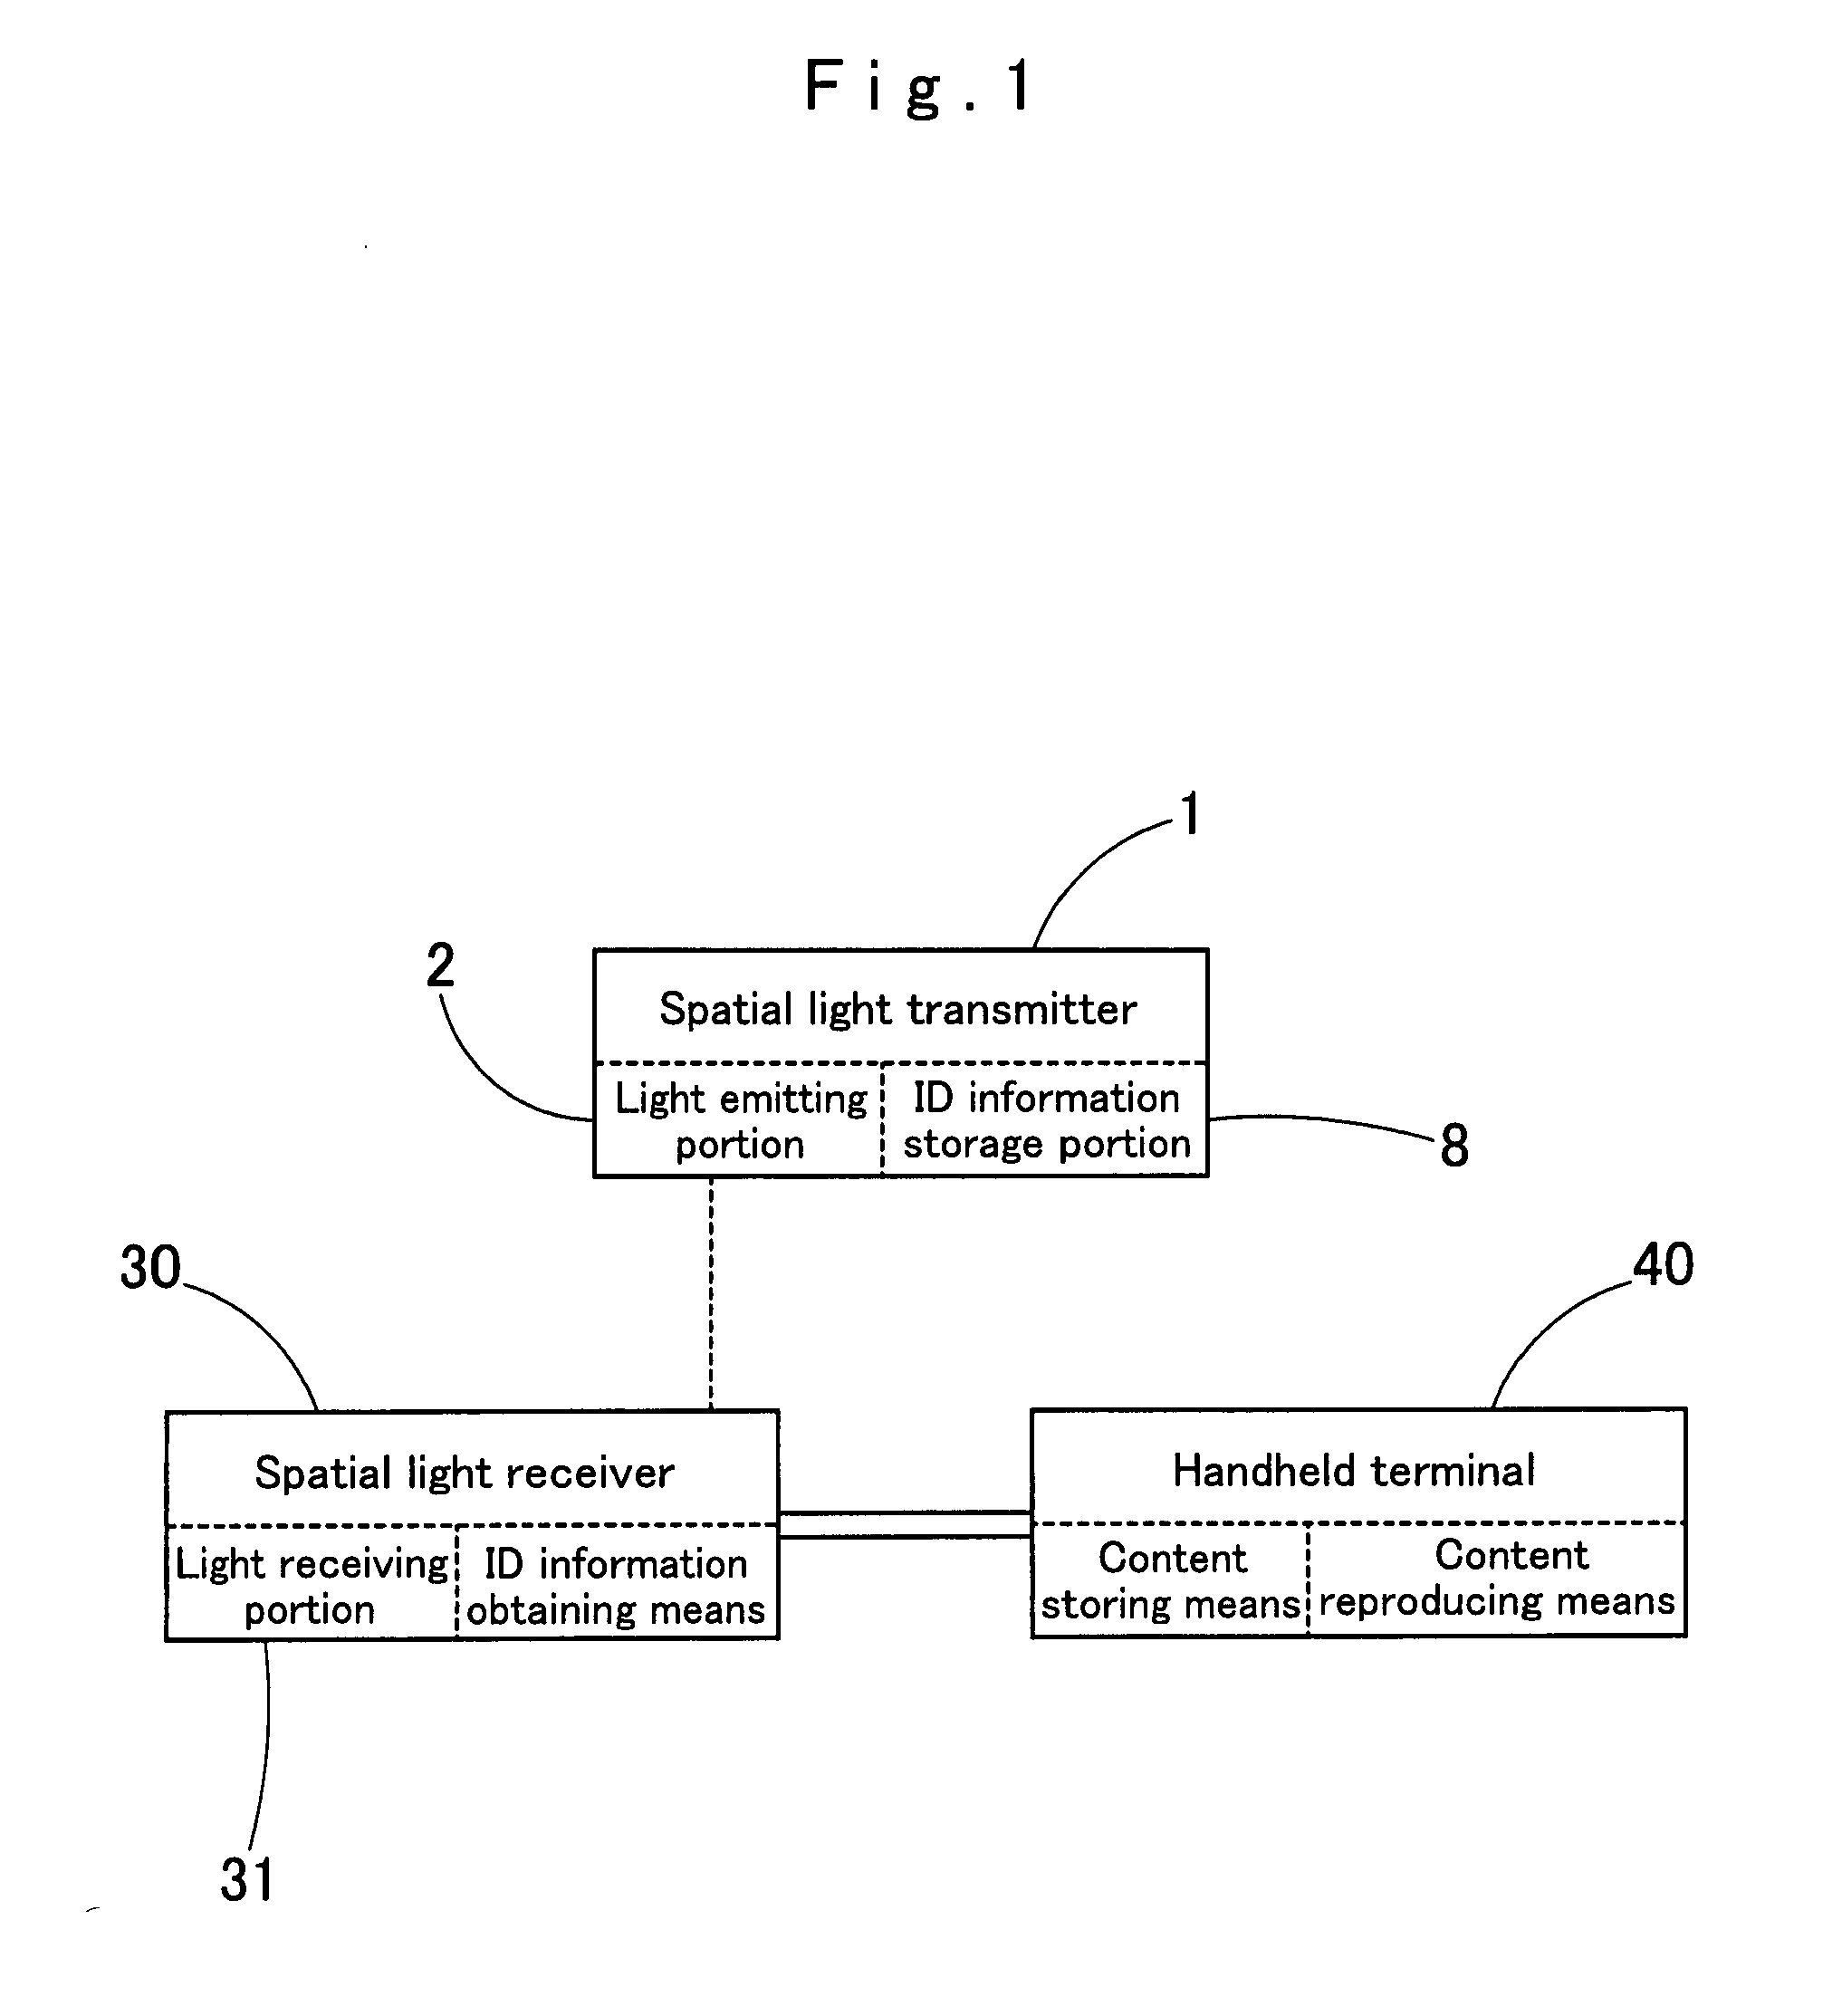 Content supplying system which uses spatial light transmission